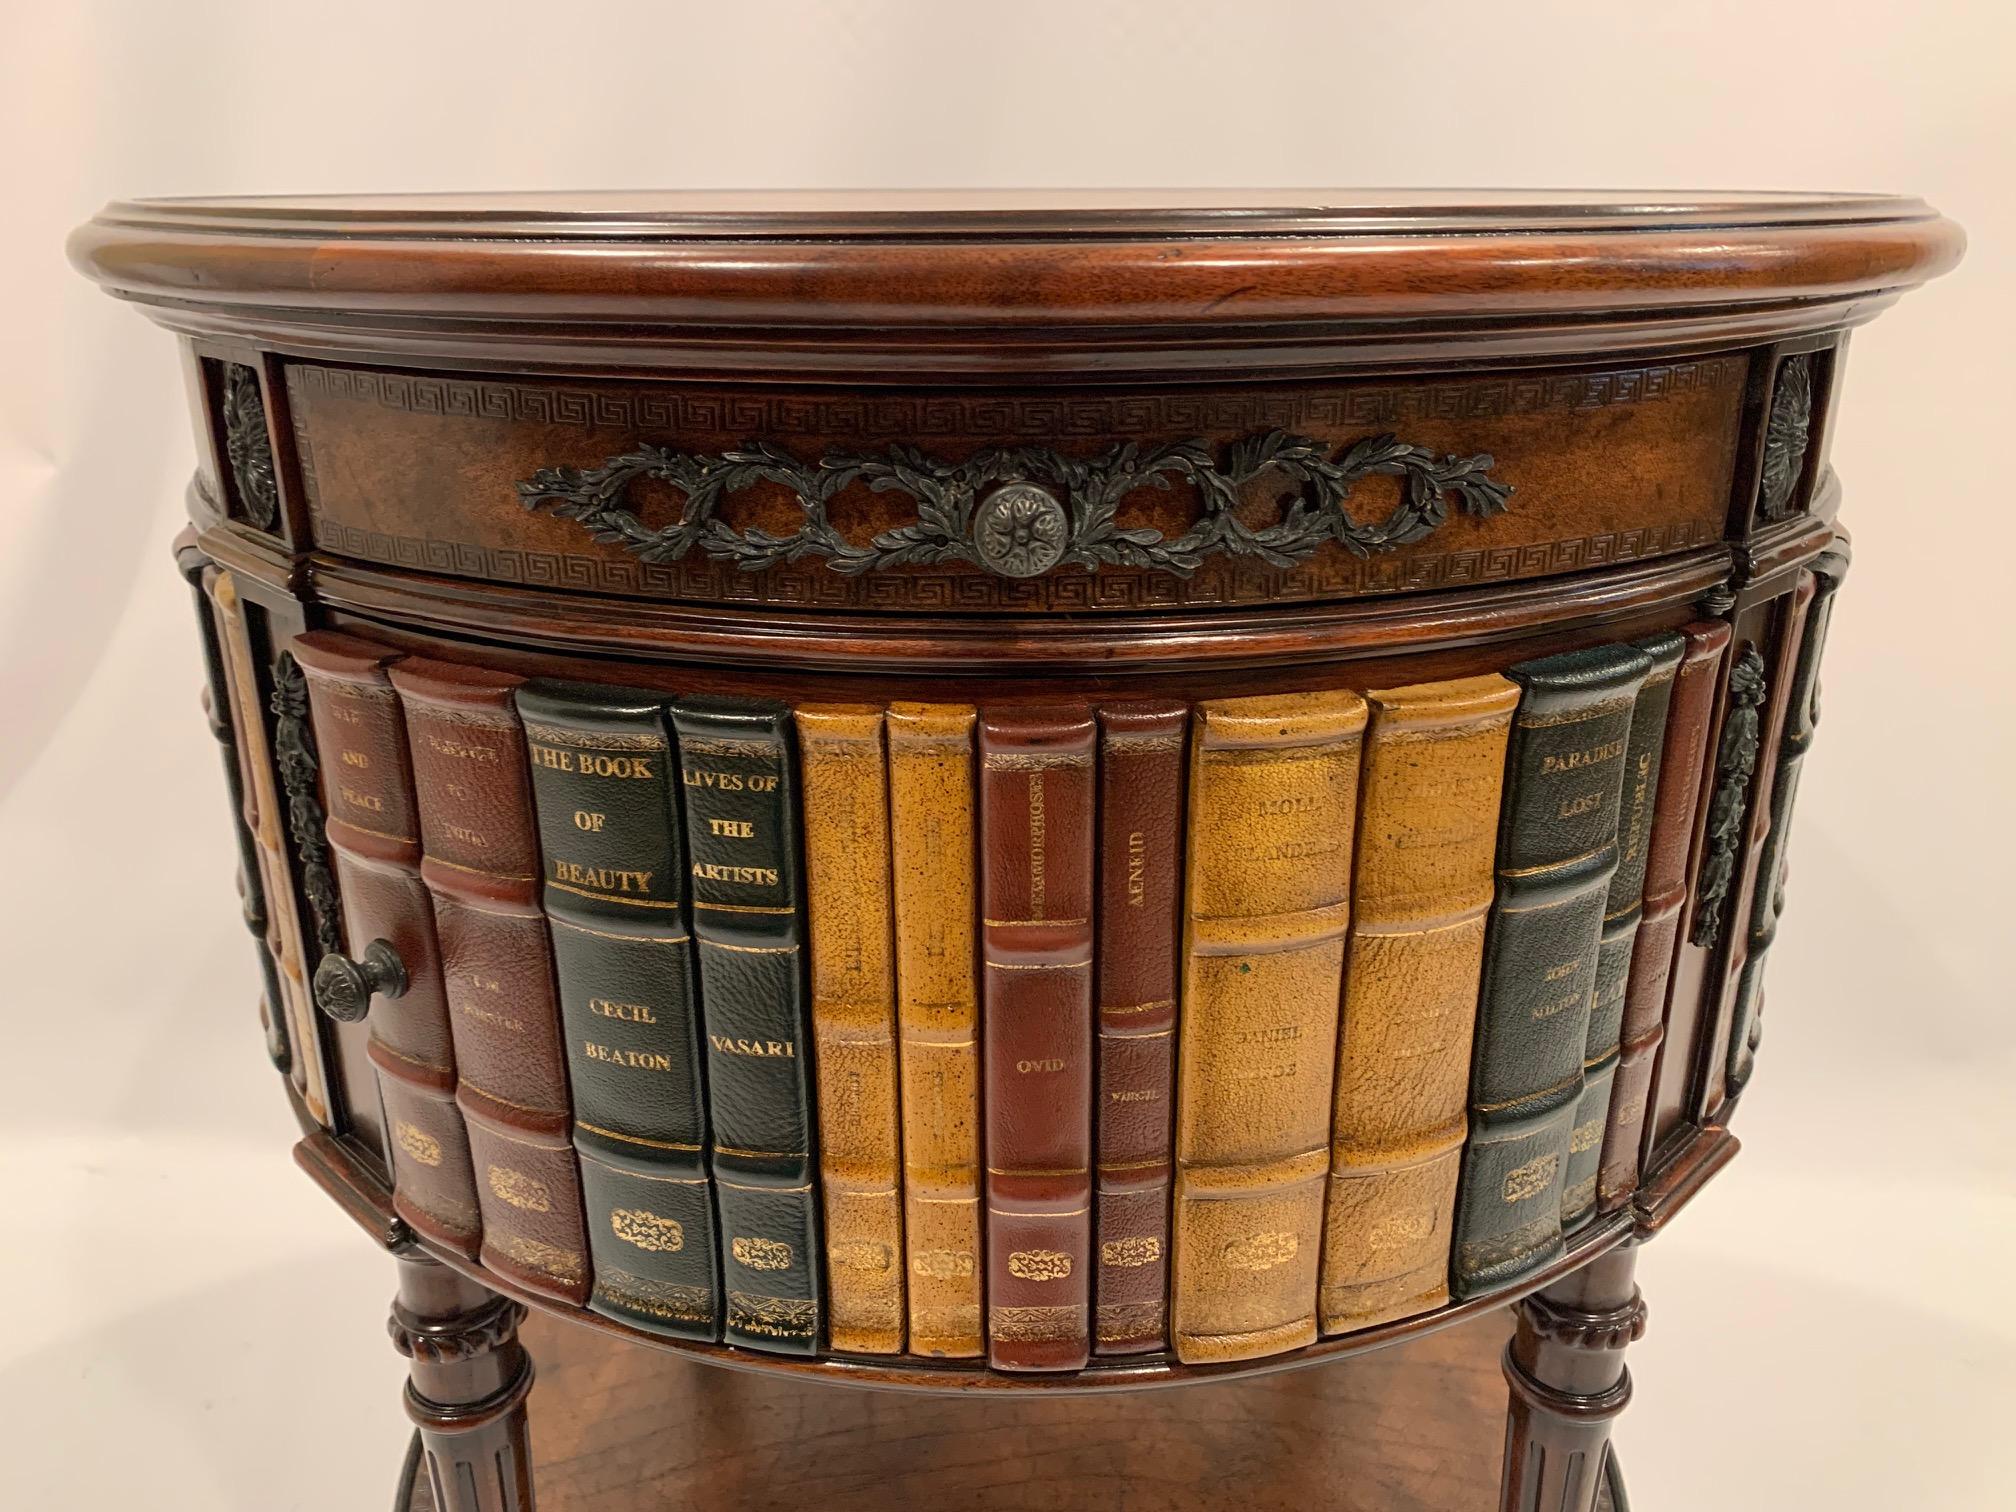 A beautifully designed round trompe l'oeil side table decorated with what looks like leather bound books on the periphery. Table has a single drawer and swing out door that open to storage. Top is a warm caramel tooled leather.
A crowd pleaser and